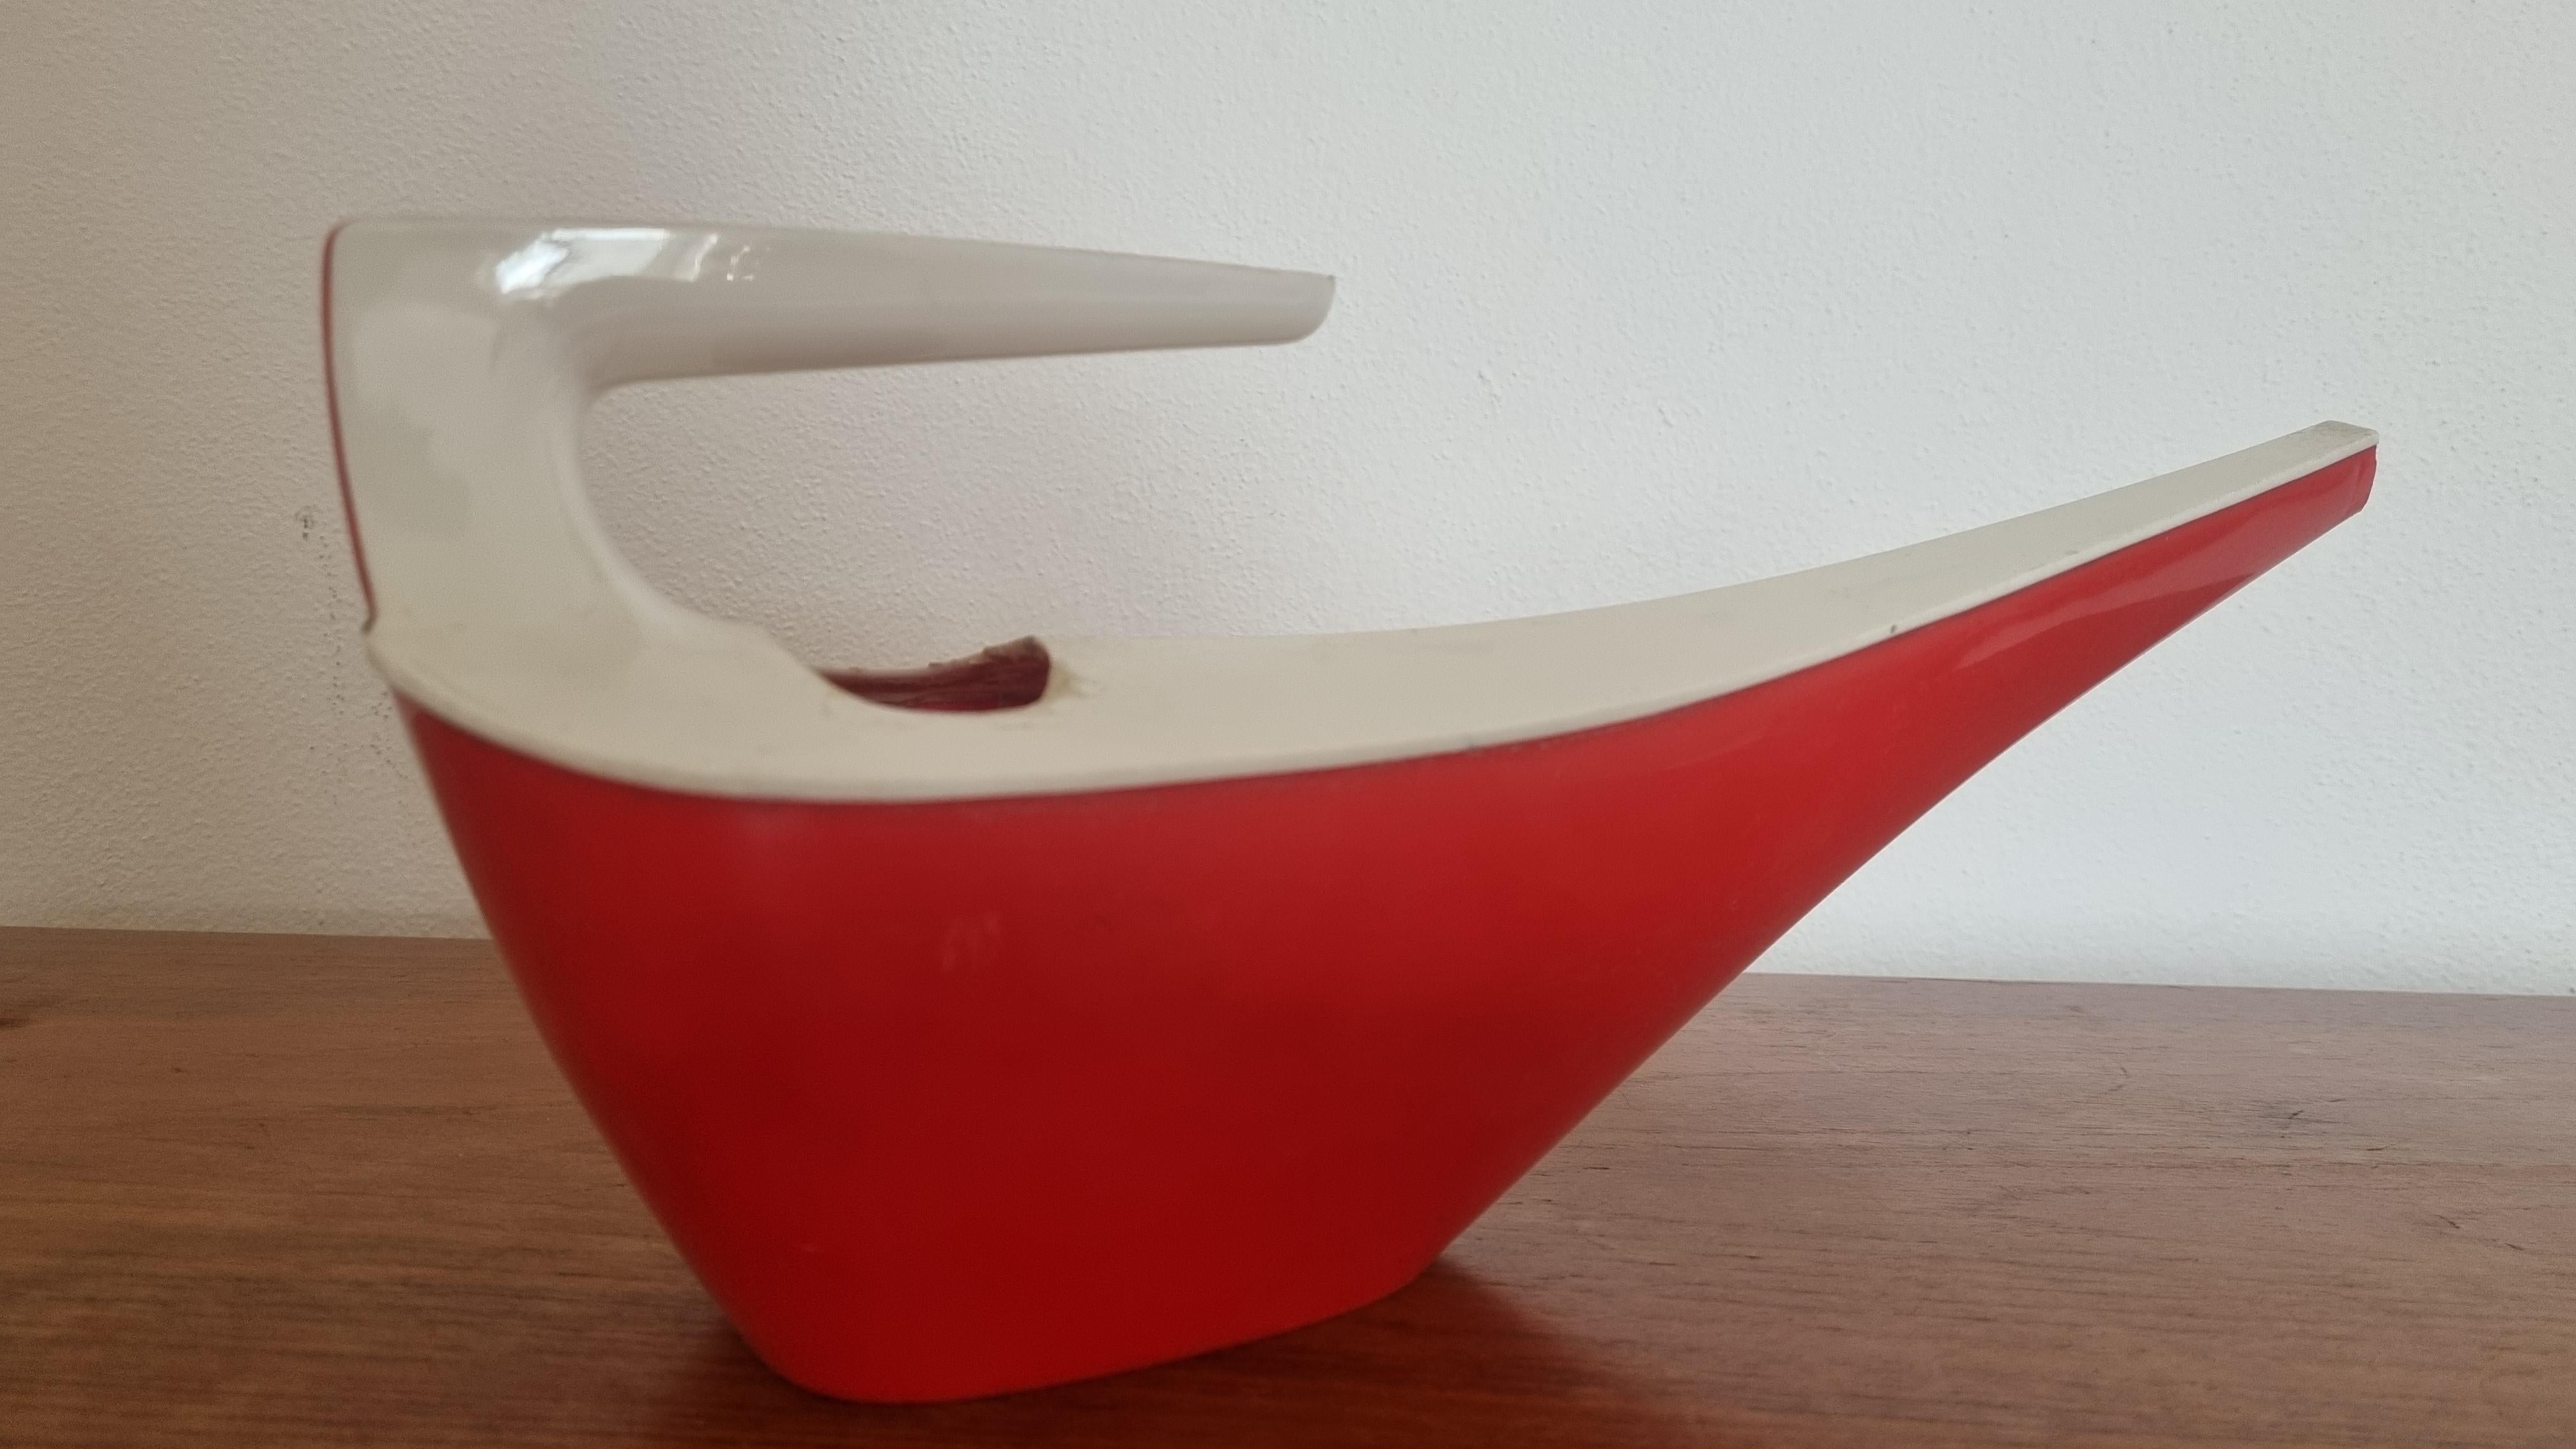 Plastic Midcentury Iconic Design Watering Can, Klaus Kunis, Germany, 1960s For Sale